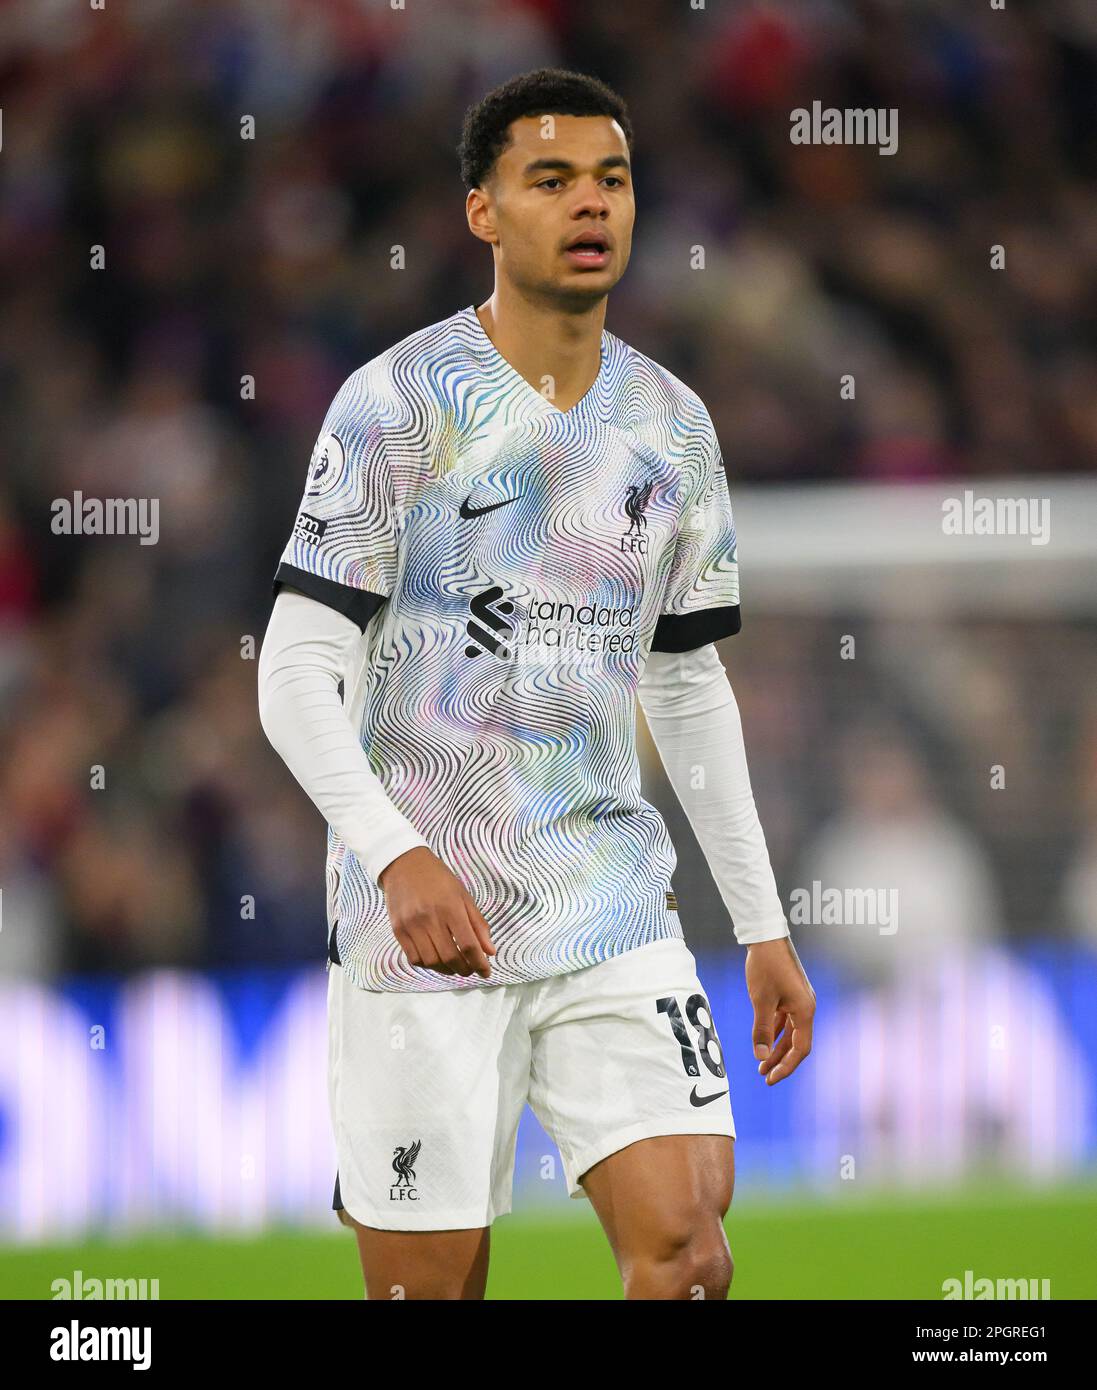 London, UK. 25th Feb, 2023. 25 Feb 2023 - Crystal Palace v Liverpool - Premier League - Selhurst Park Liverpool's Cody Gakpo during the Premier League match against Crystal Palace. Picture Credit: Mark Pain/Alamy Live News Stock Photo